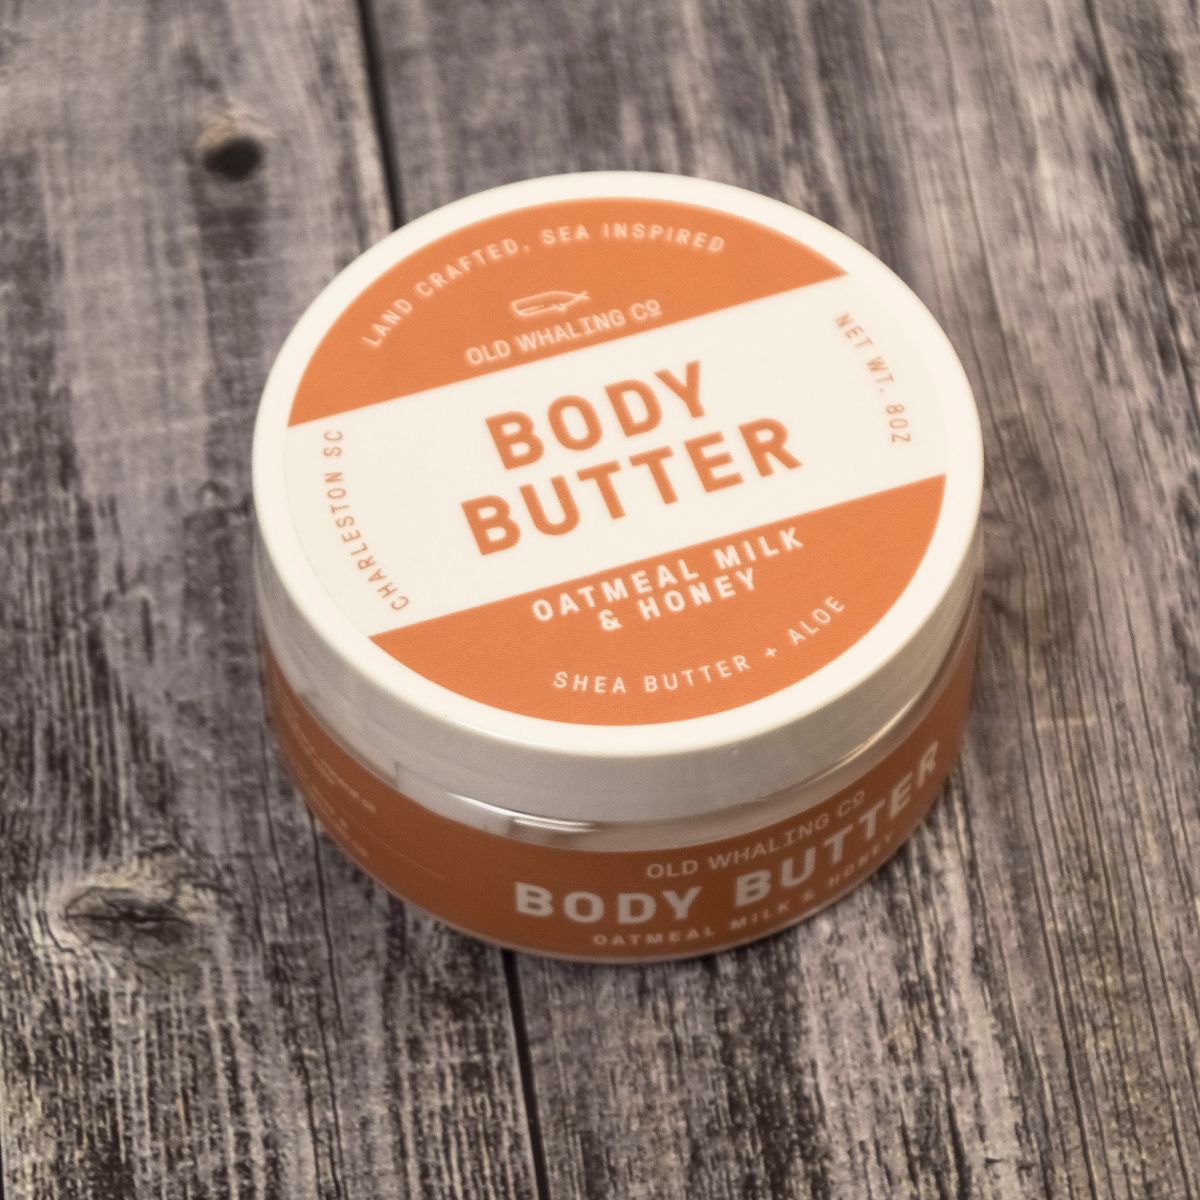 Day 3: Oatmeal Milk and Honey Body Butter